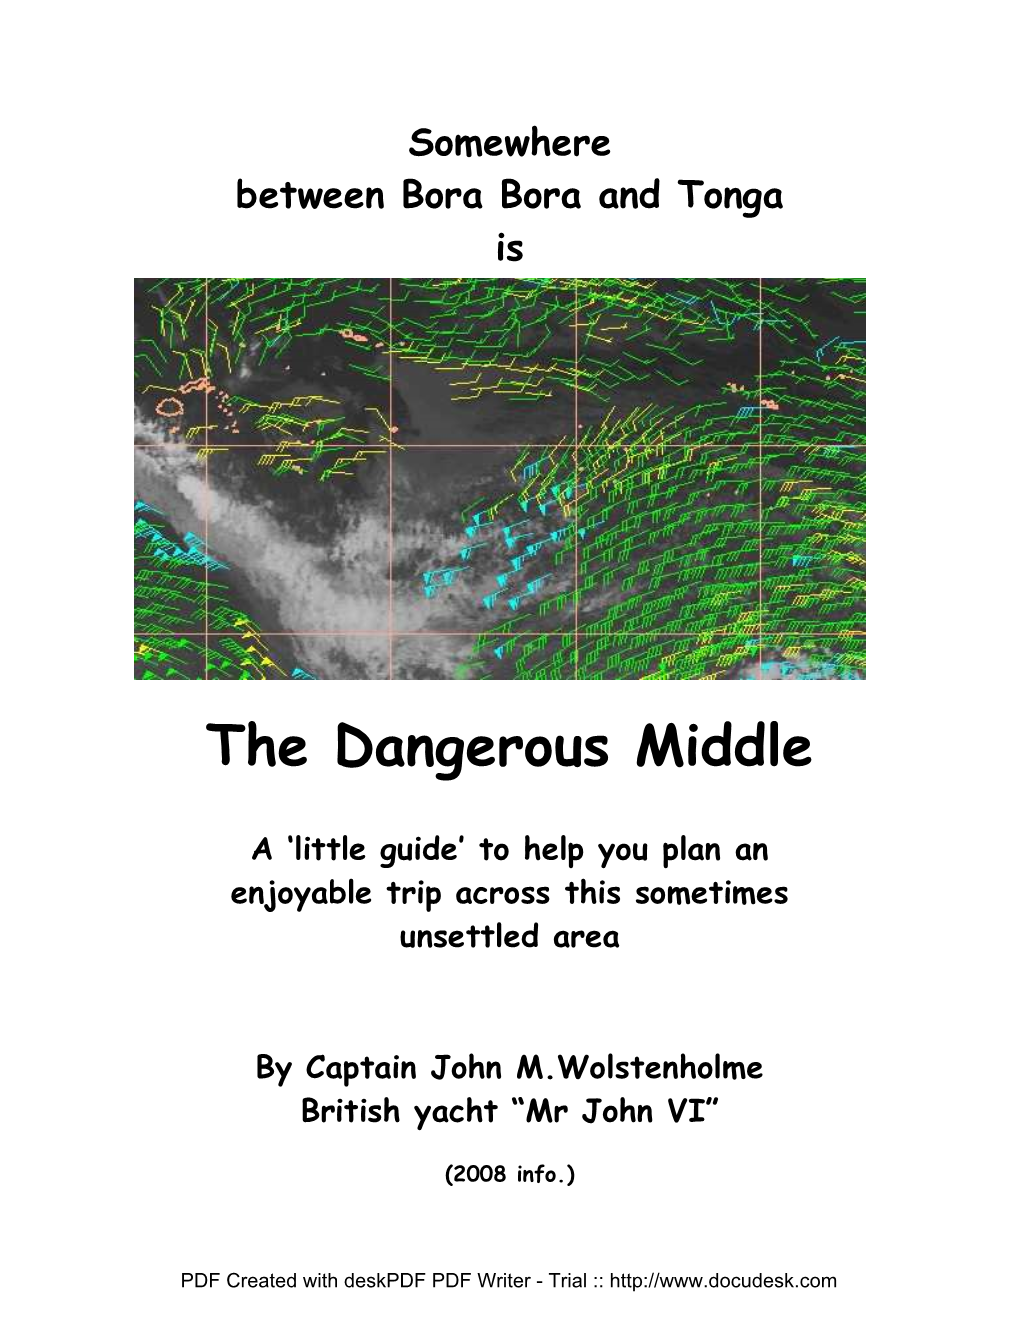 Mr. John's Guide to the Dangerous Middle